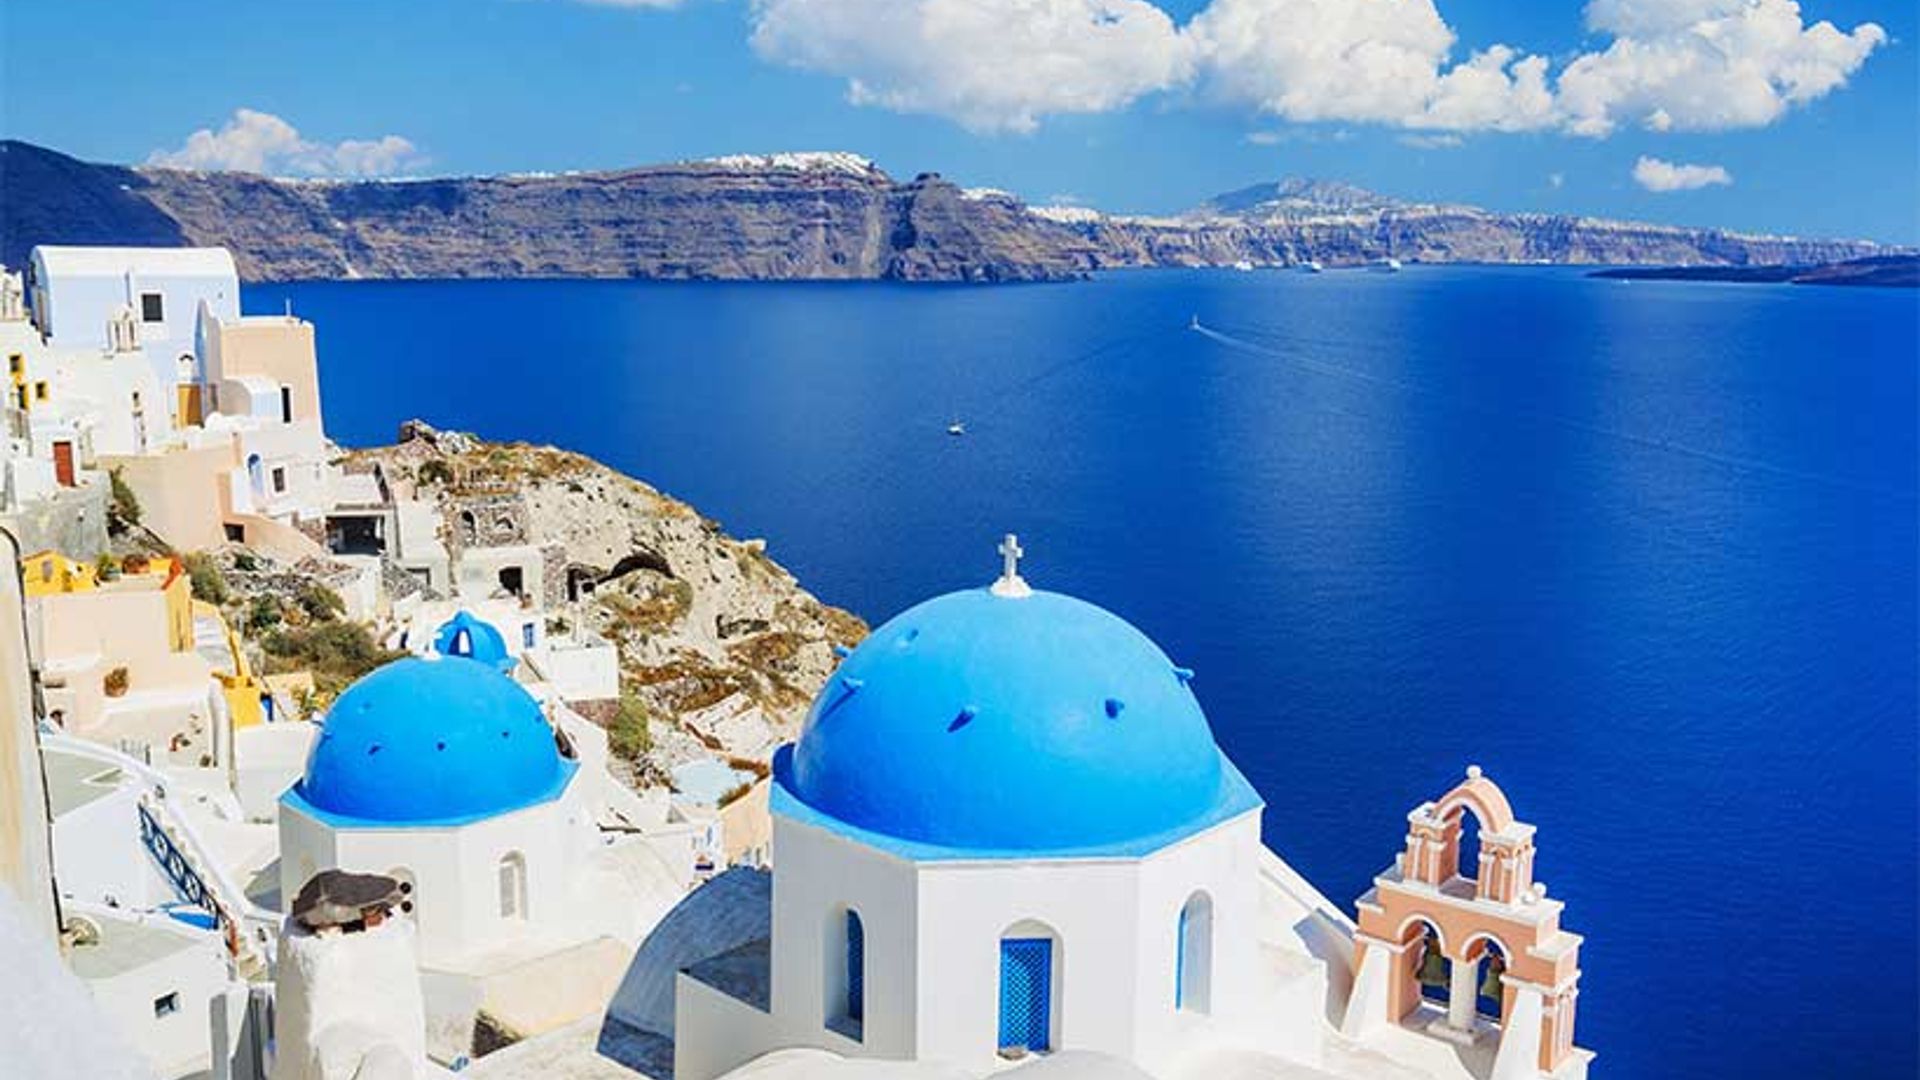 Santorini: Discover why the picturesque Greek island is loved by stars including Angelina Jolie